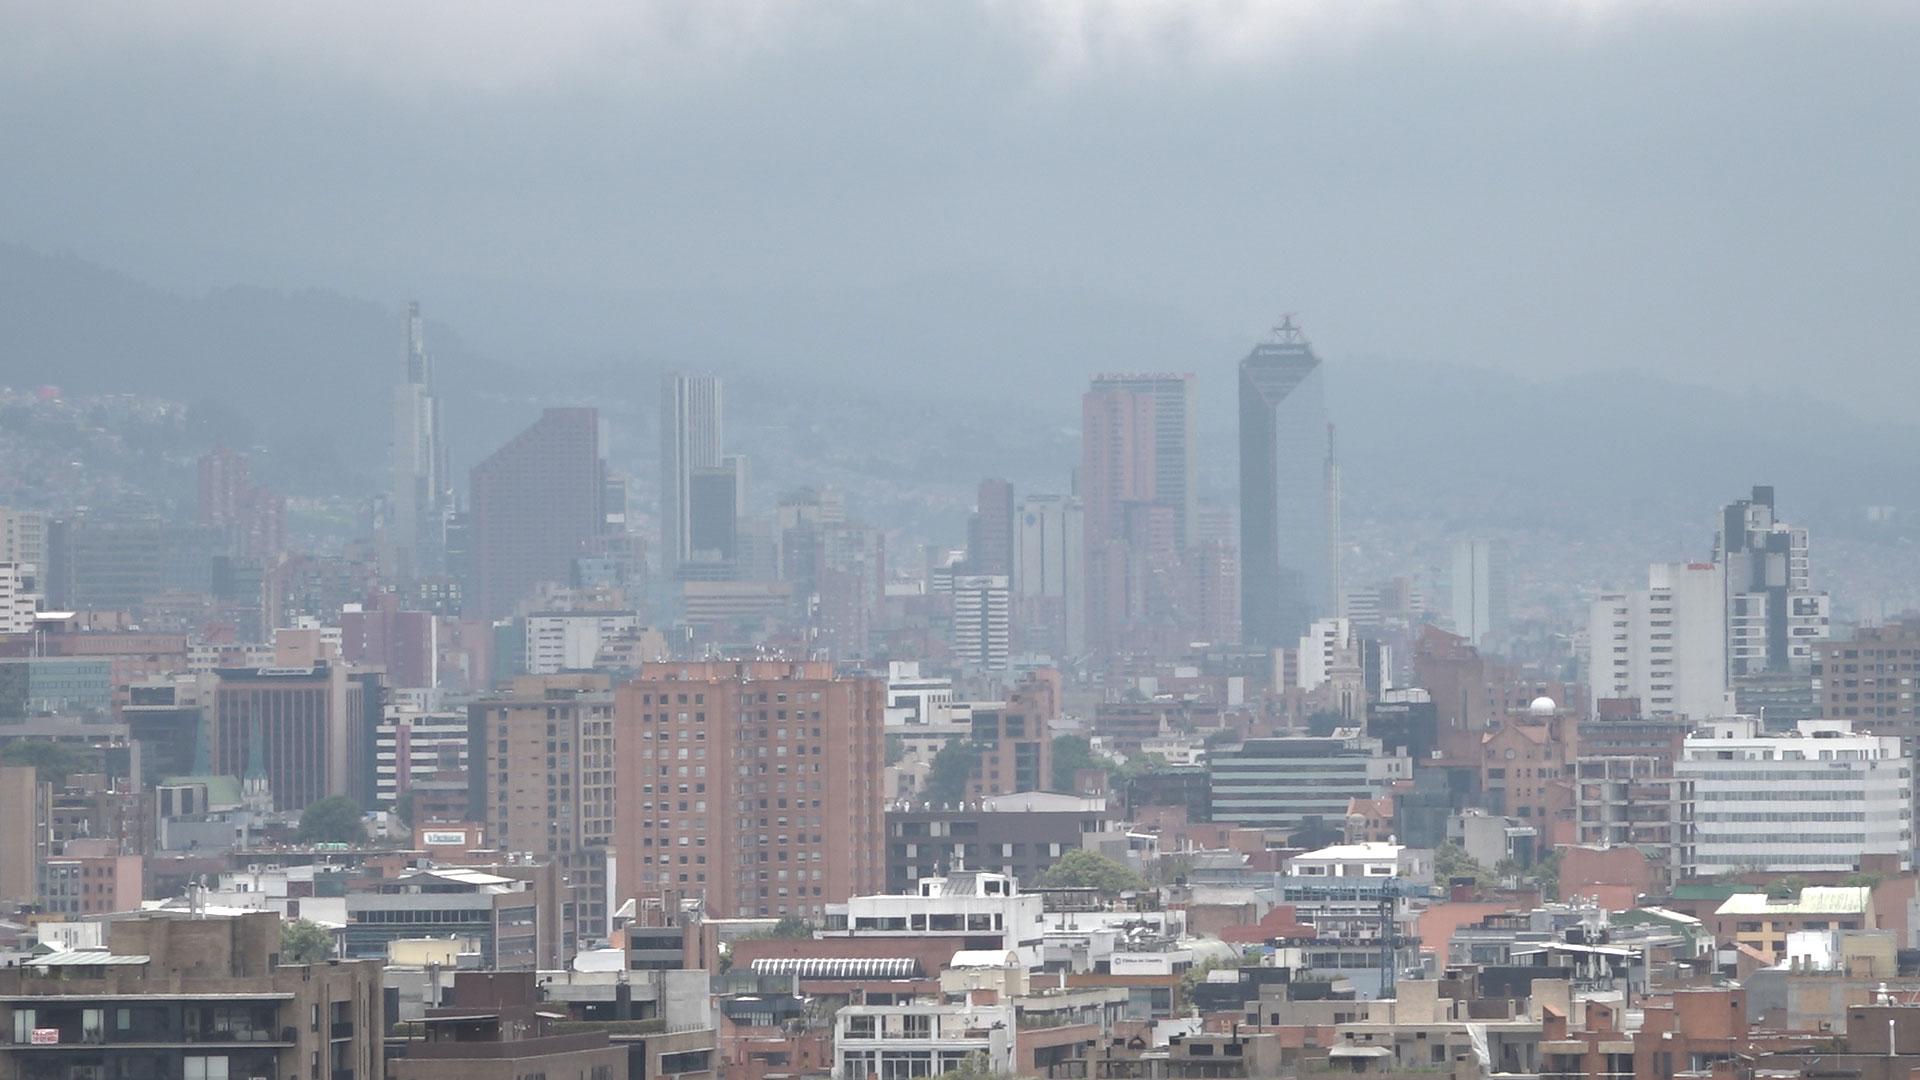 Colombia's capital city Bogotá fills with fog after fires in the Amazon.